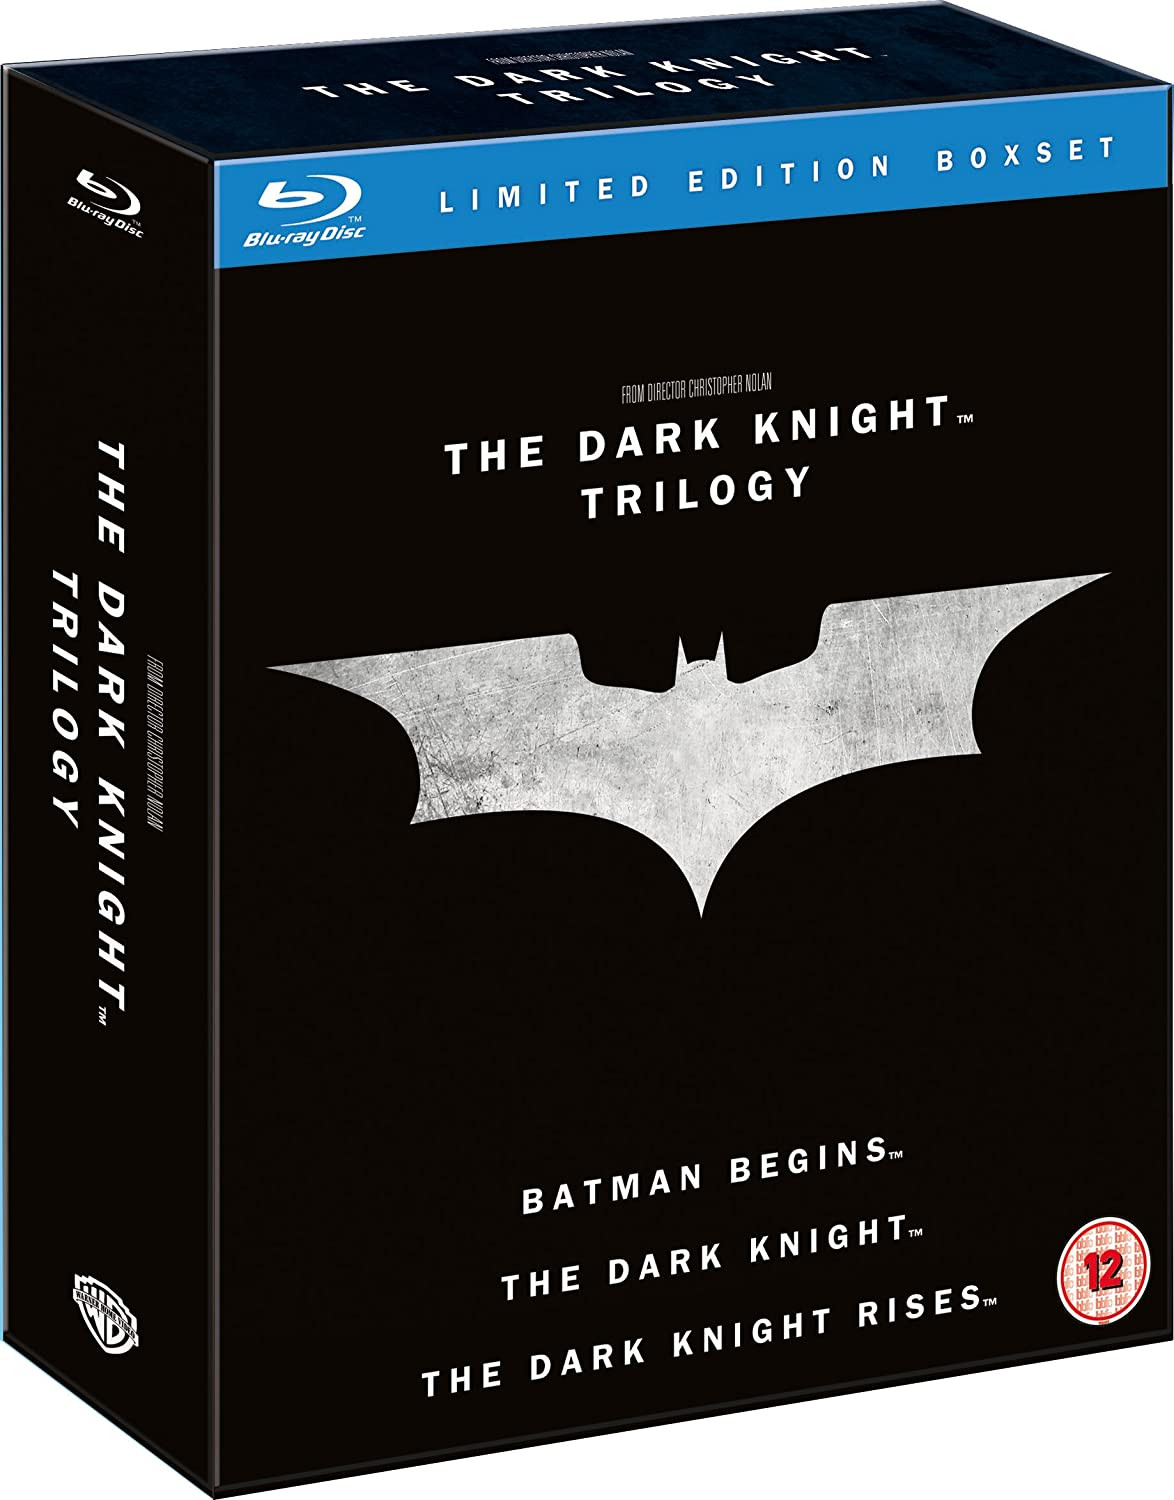 The Dark Knight Trilogy Limited Edition